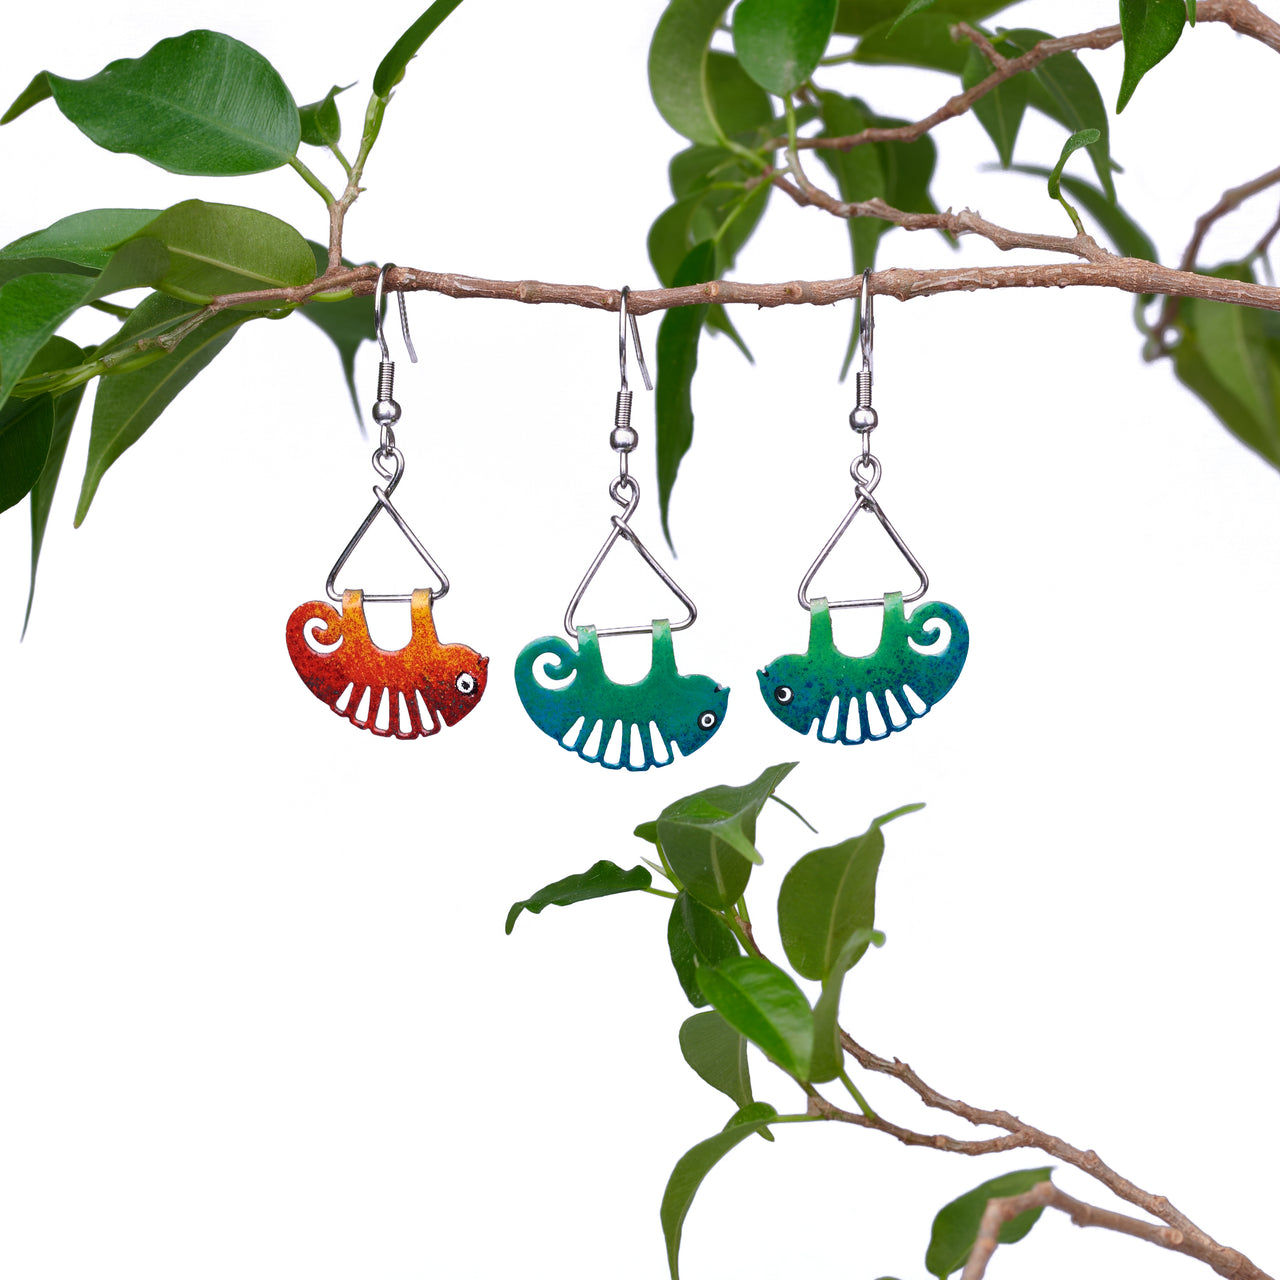 chameleon earrings on are hanging on a twig. One chameleon is red and there are two green chameleons